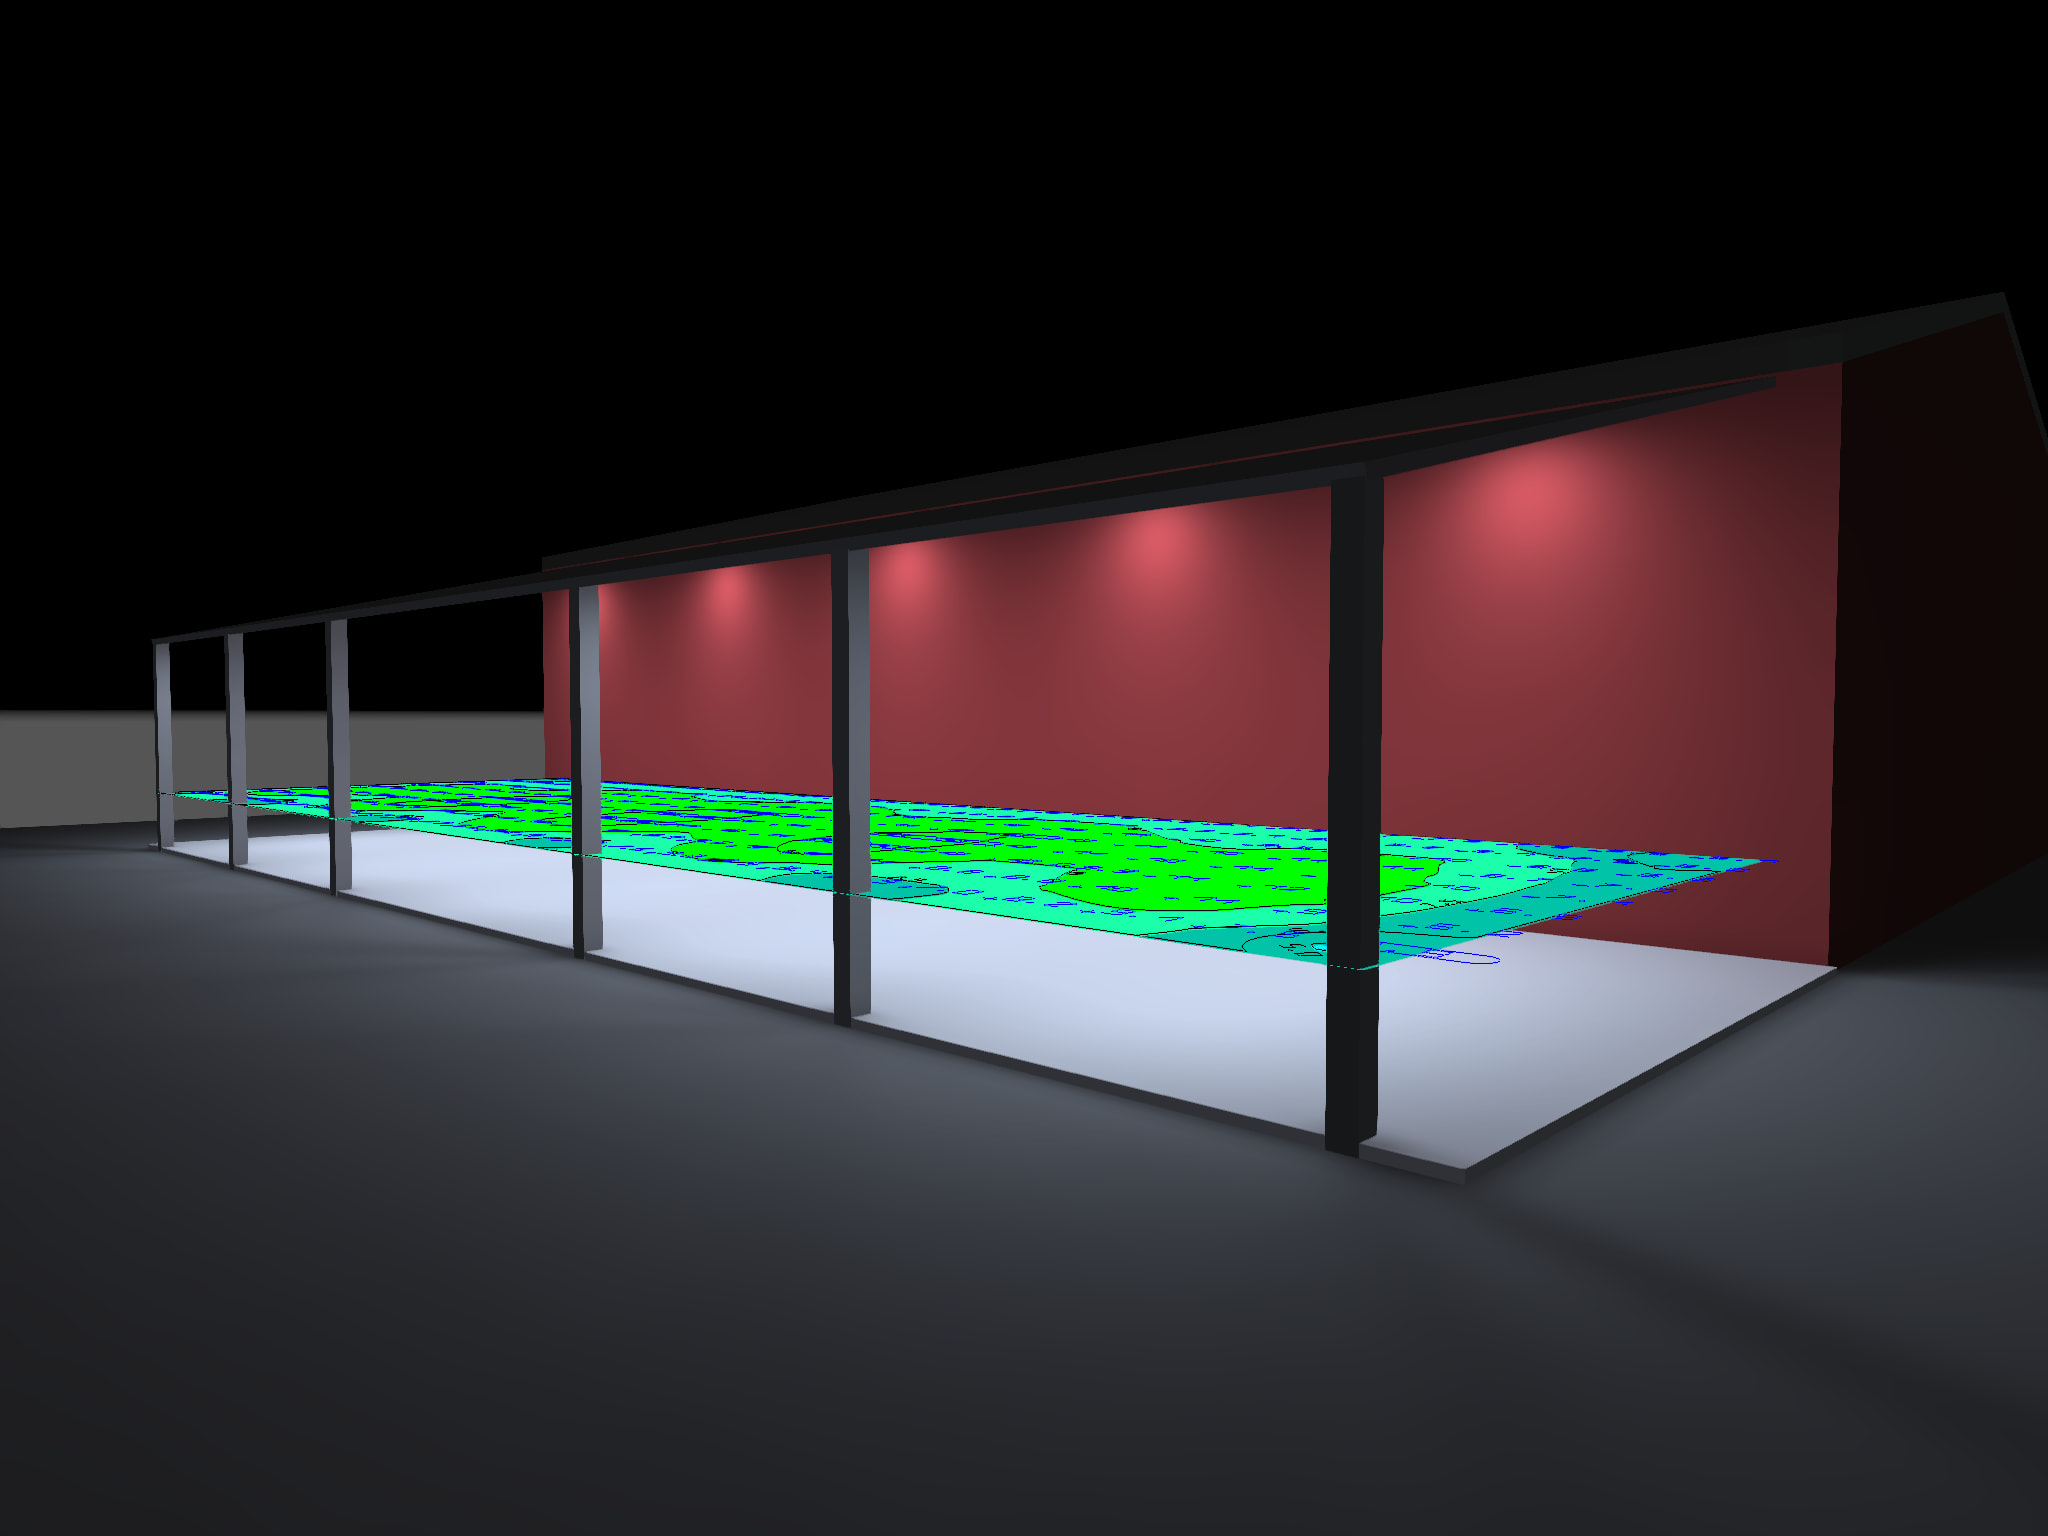 3D design of 20 8 inch recessed downlights illuminating the area beneath a commercial canopy with footcandle ratings and false color